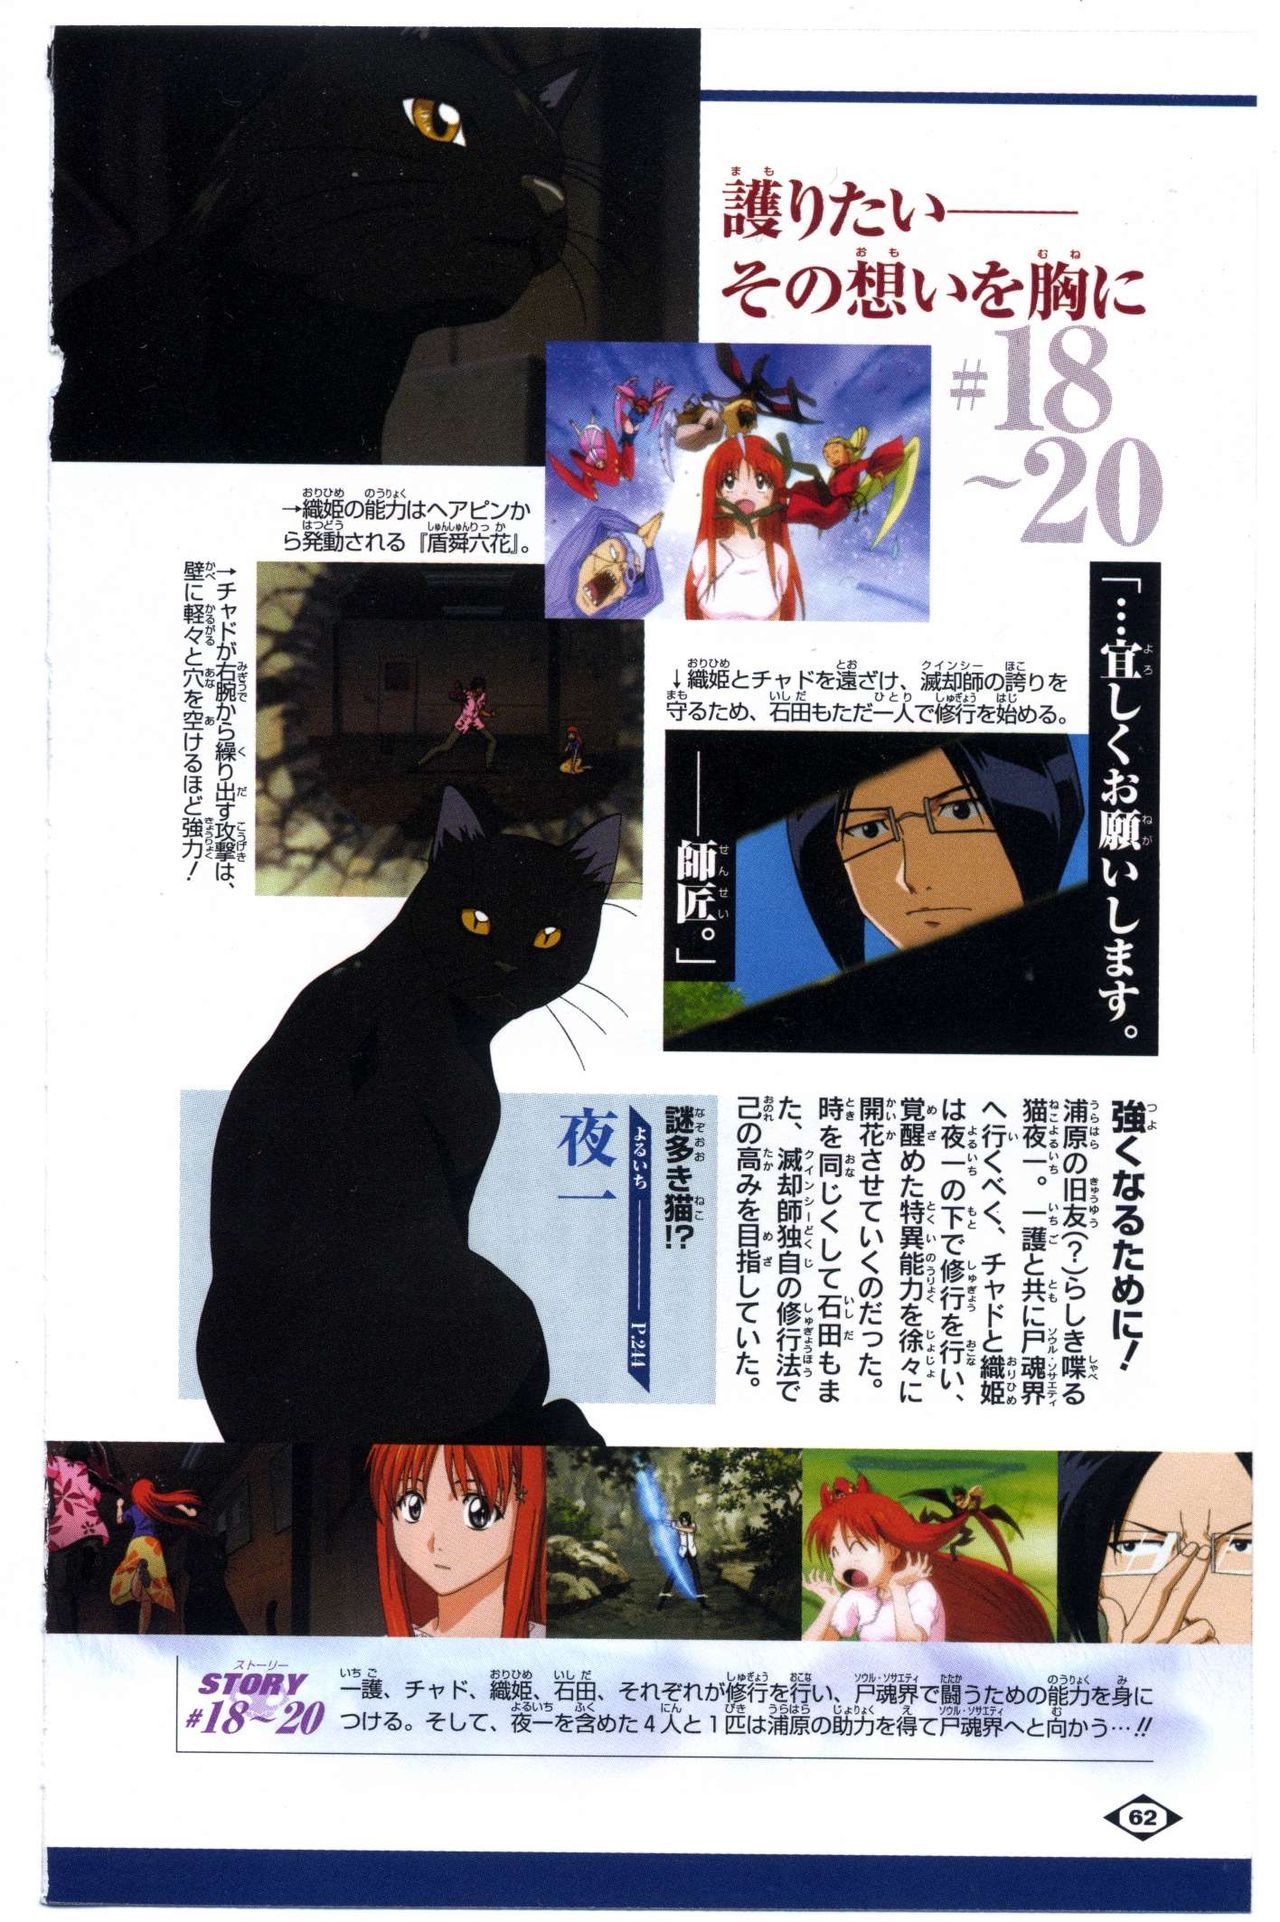 Bleach: Official Animation Book VIBEs 62